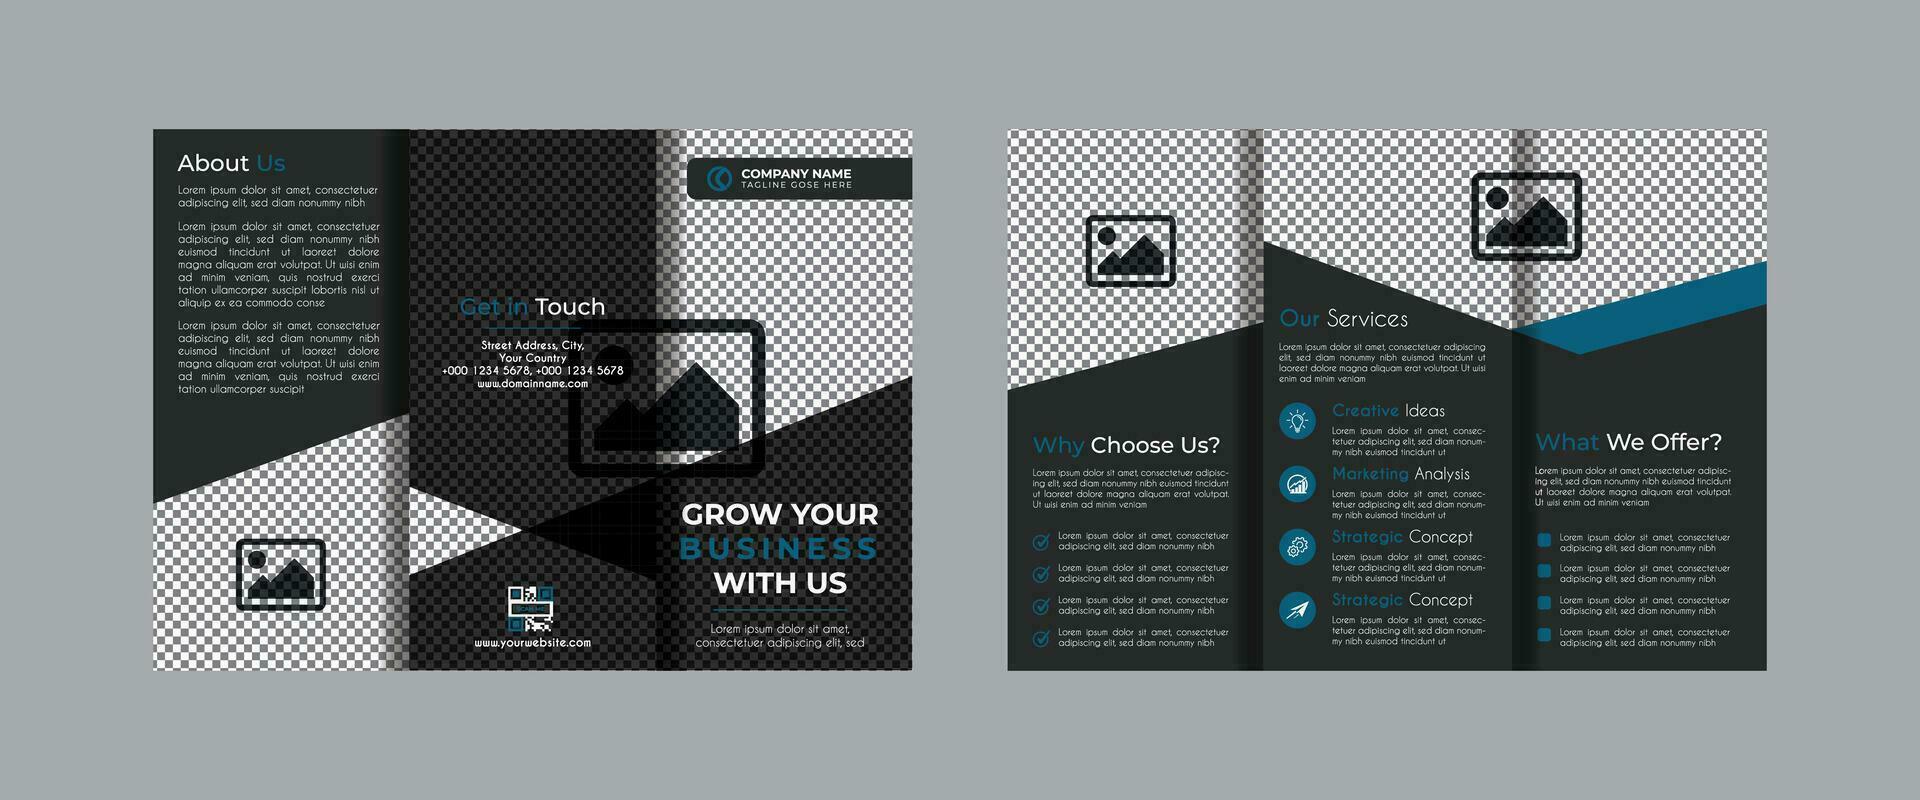 Annual Report Background Business Book Cover Design Template in A4. Can be adapt to Brochure, Magazine, Poster, Corporate Presentation, Portfolio, Flyer, Banner, Website. vector